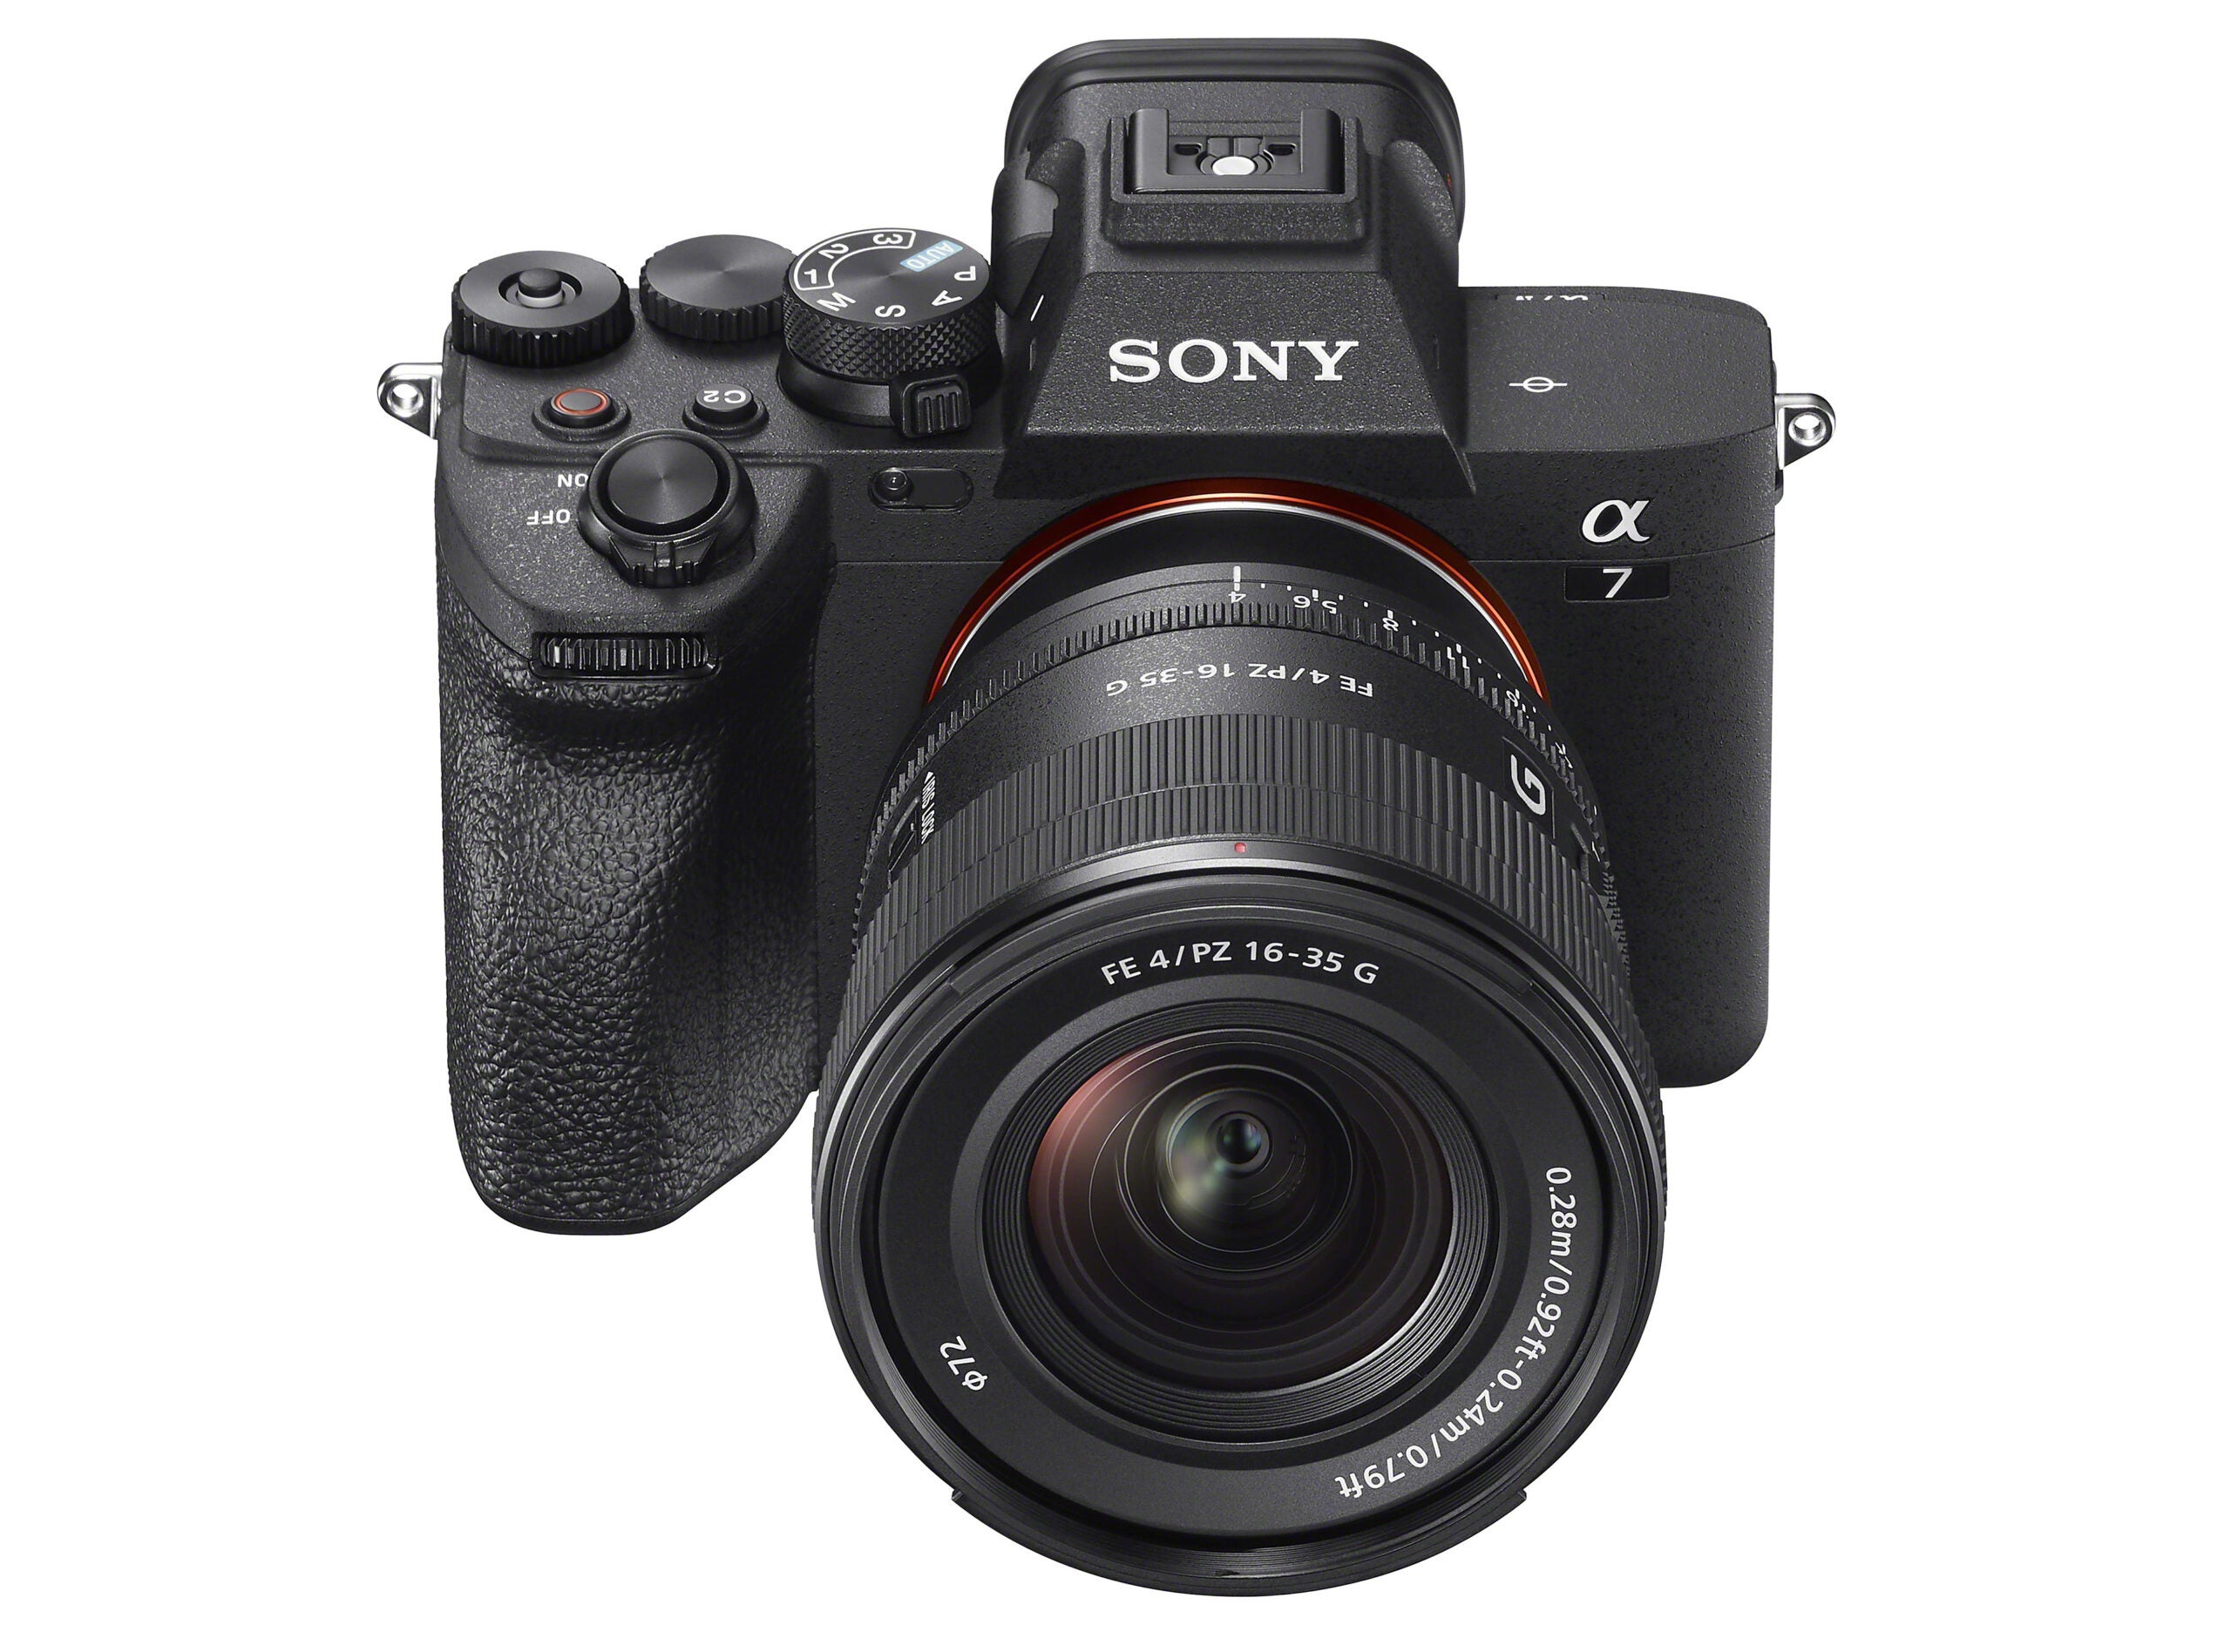 The new Sony FE PZ 16-35mm f/4 G zoom lens mounted on an a7-series camera.